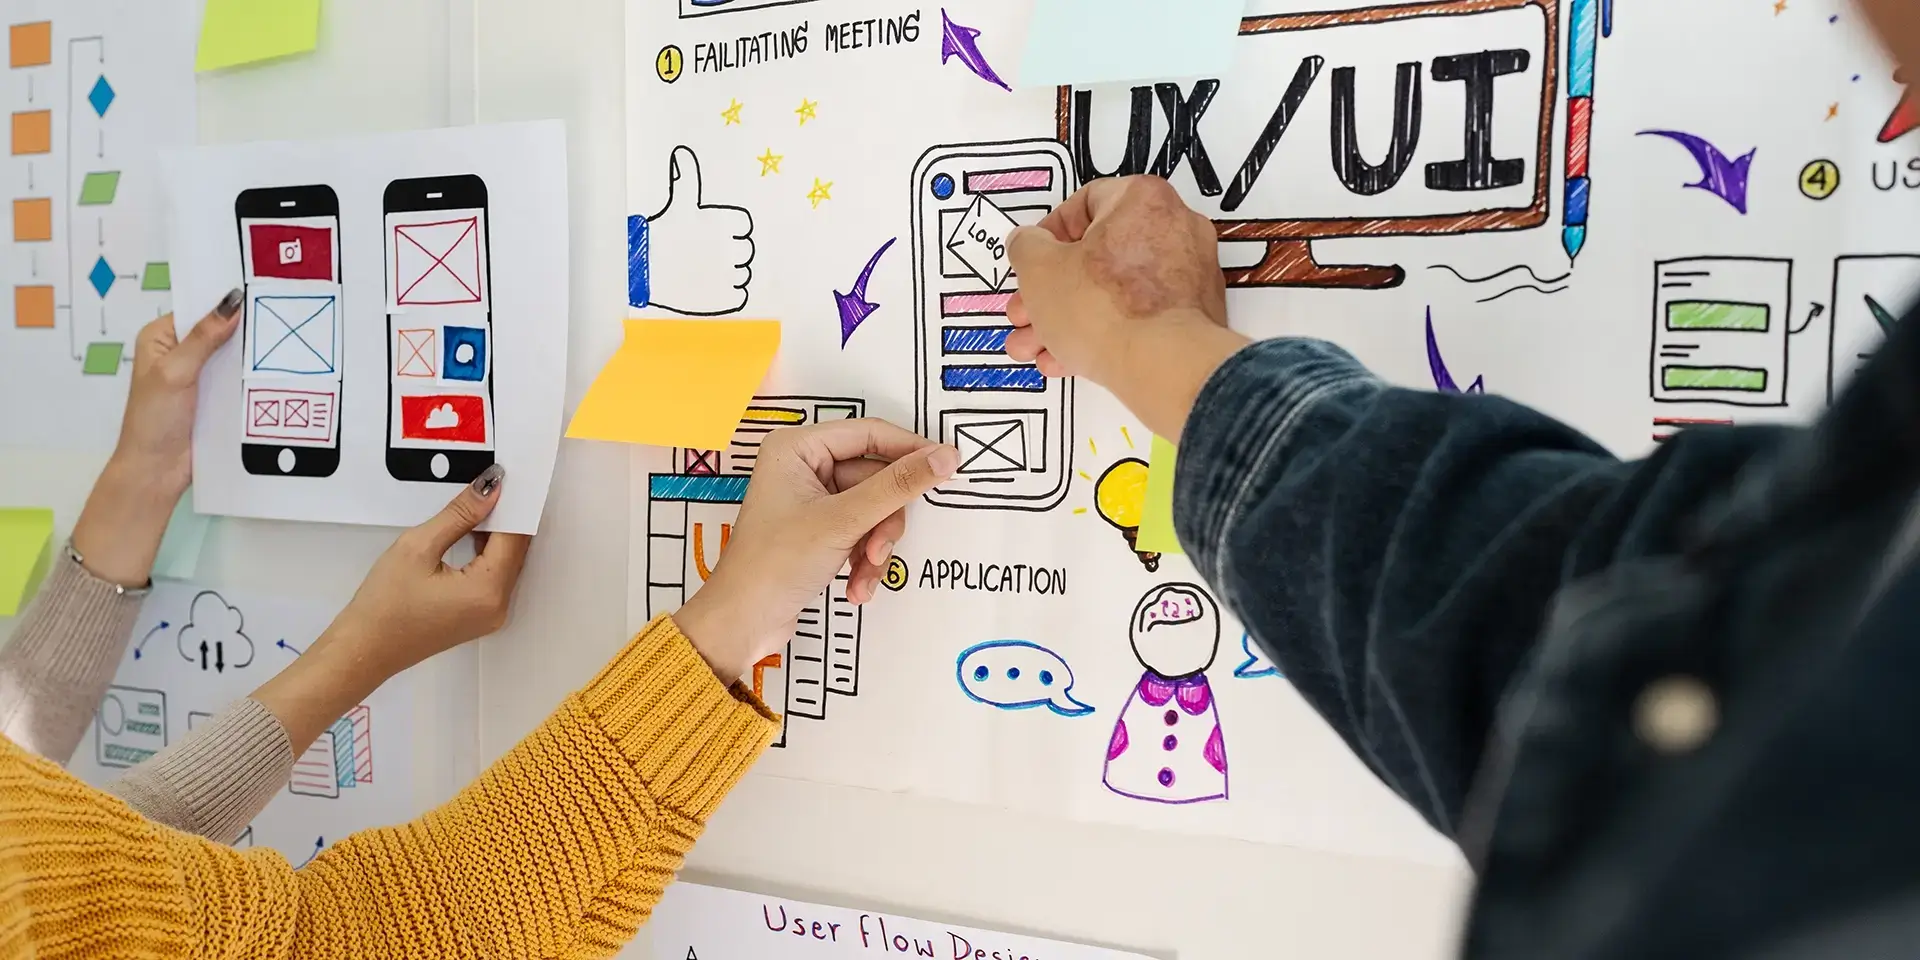 Group of 3 people's hands designing in a whiteboard using papers